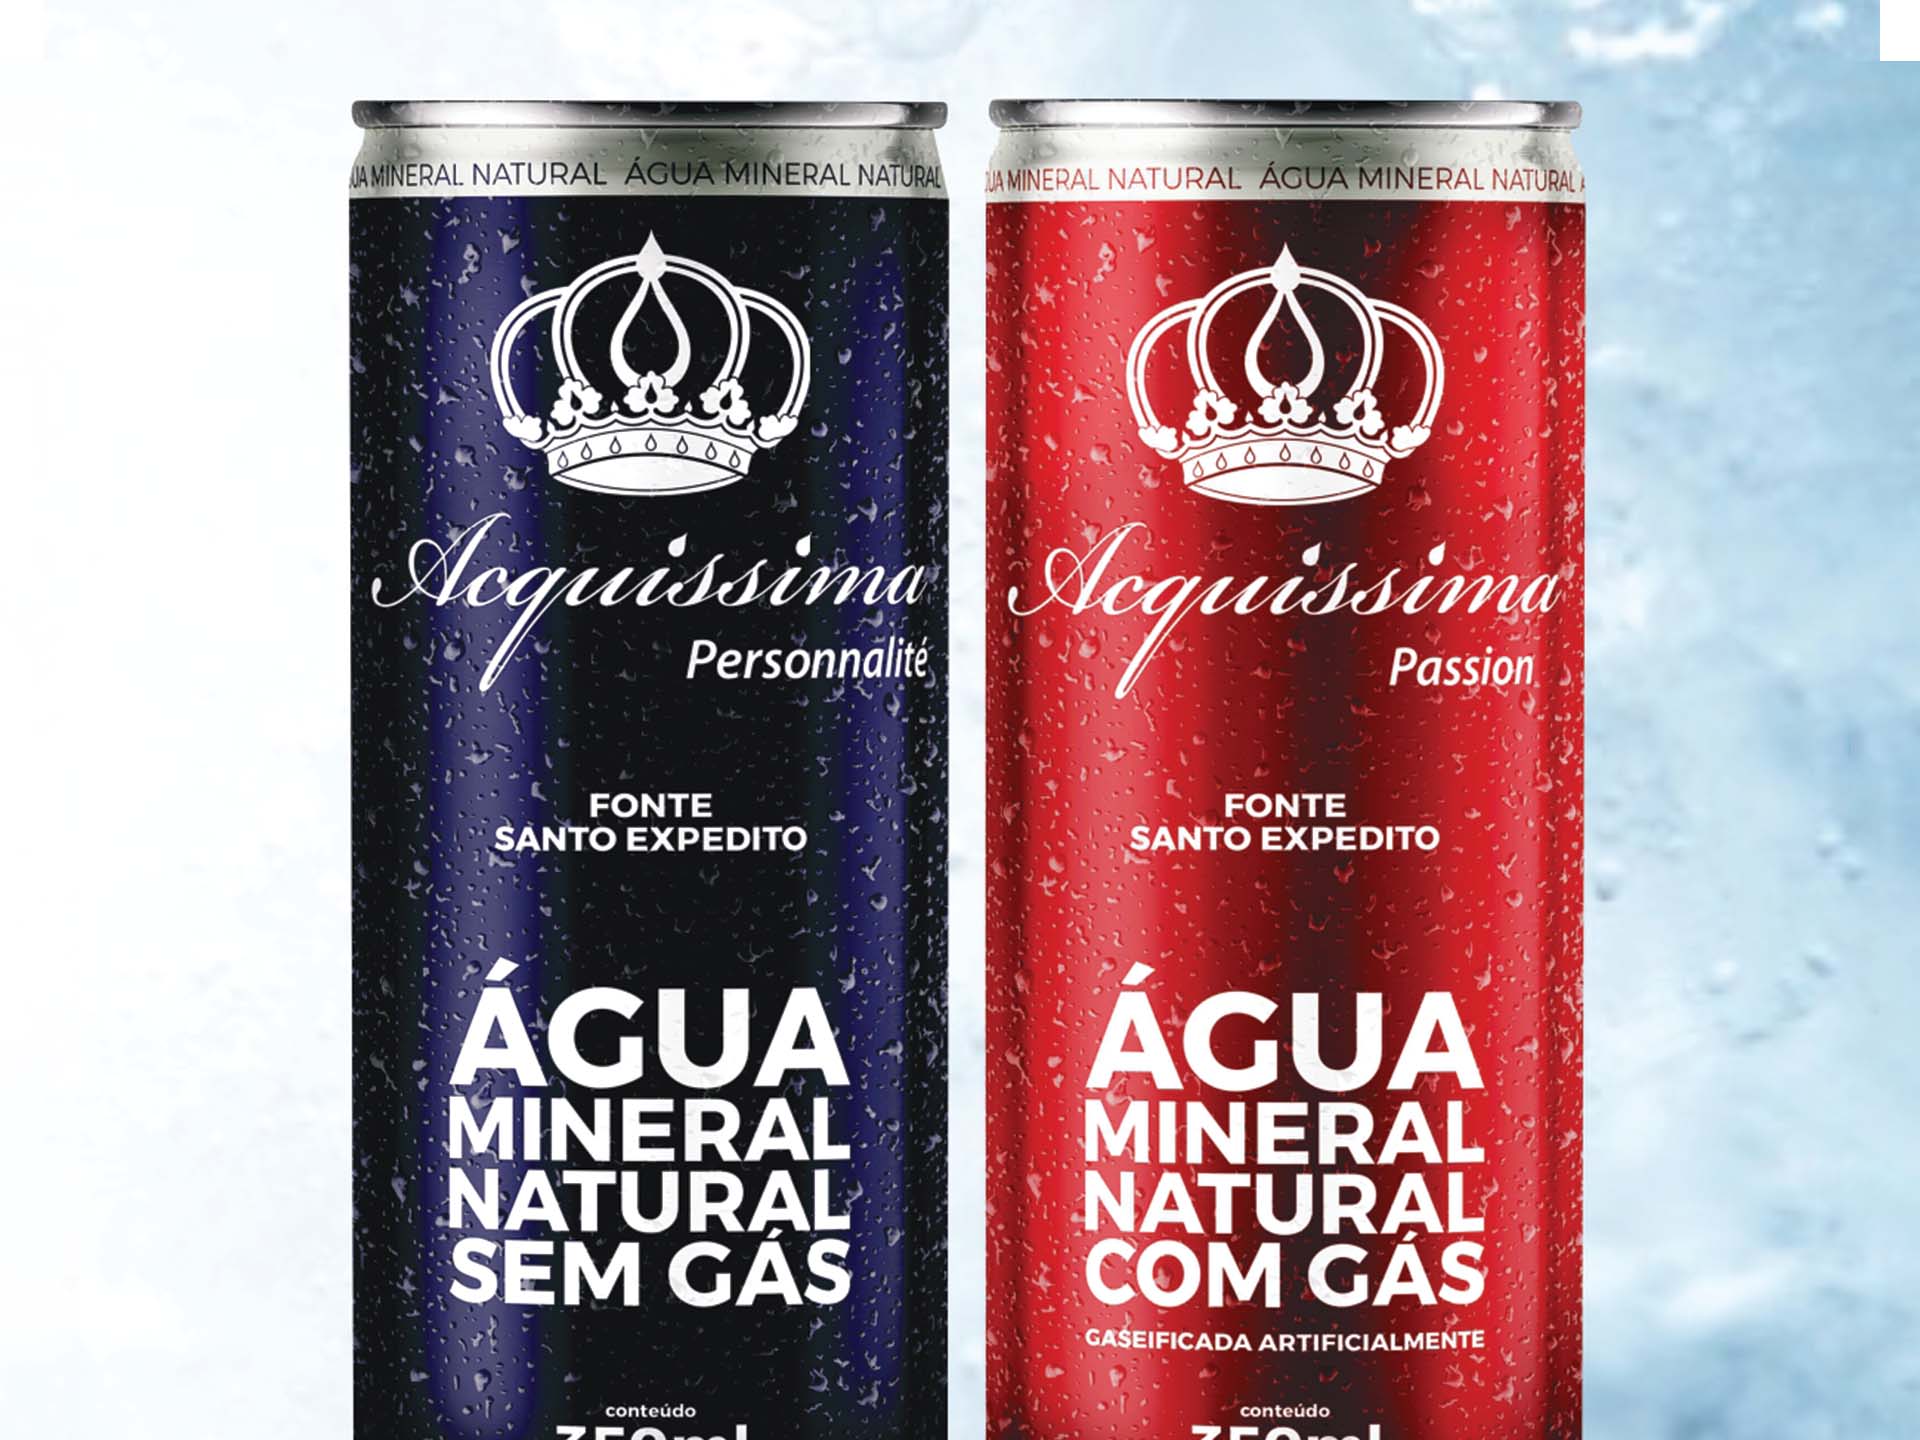 Two aluminum cans - one dark purple and one cherry red - against a light blue background.